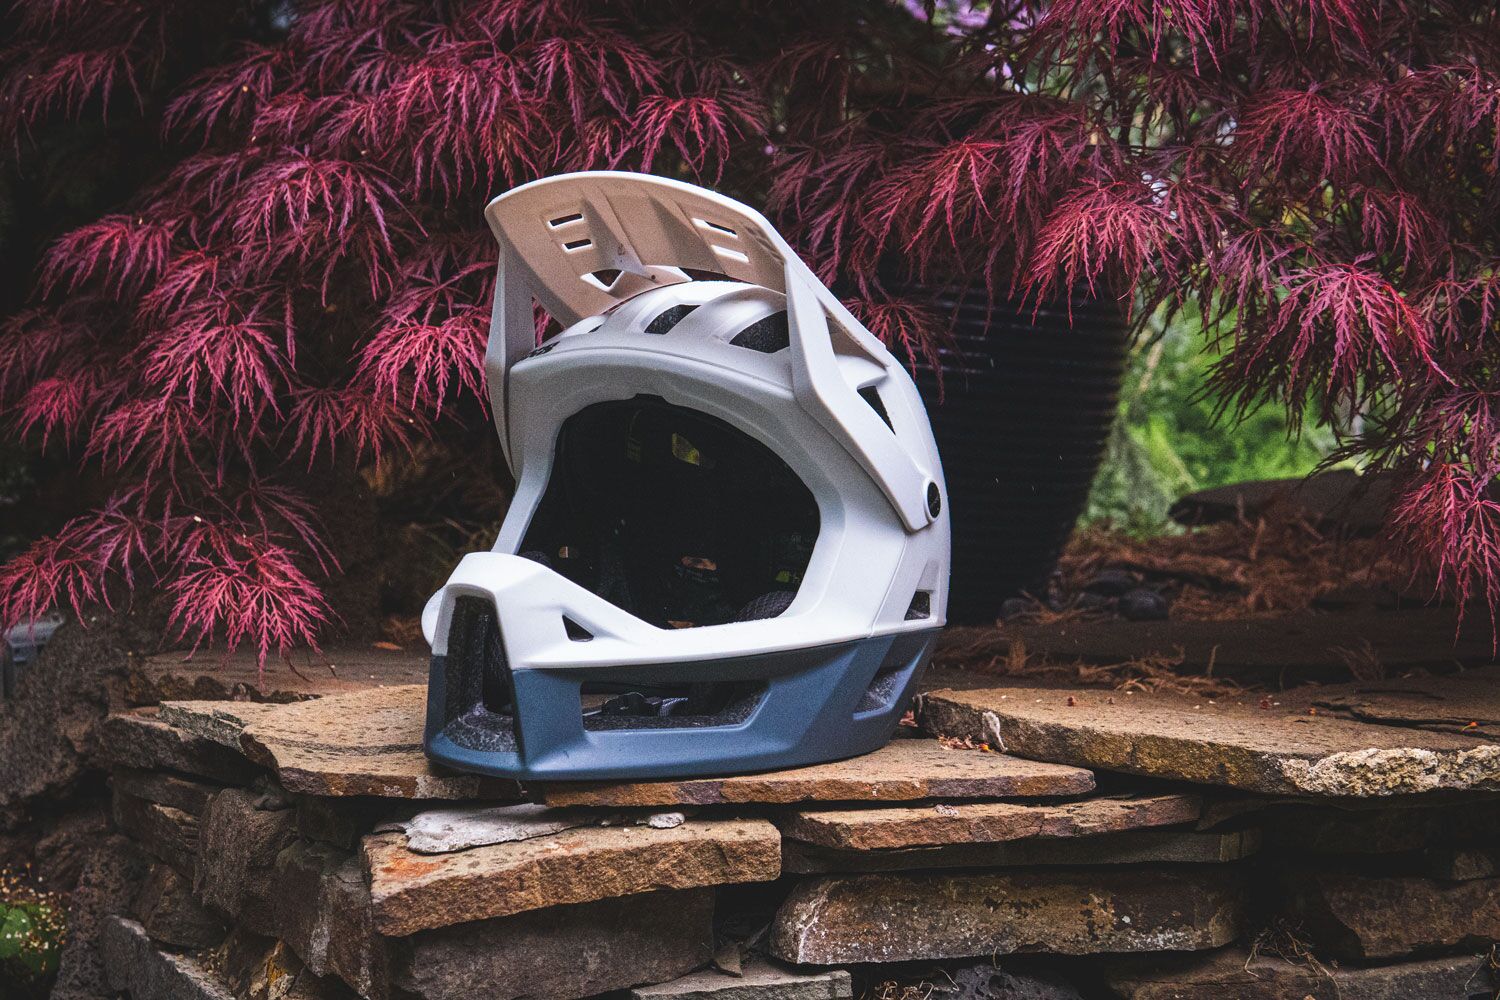 iXS Trigger FF Mountain Bike Helmet Review by The Loam Wolf